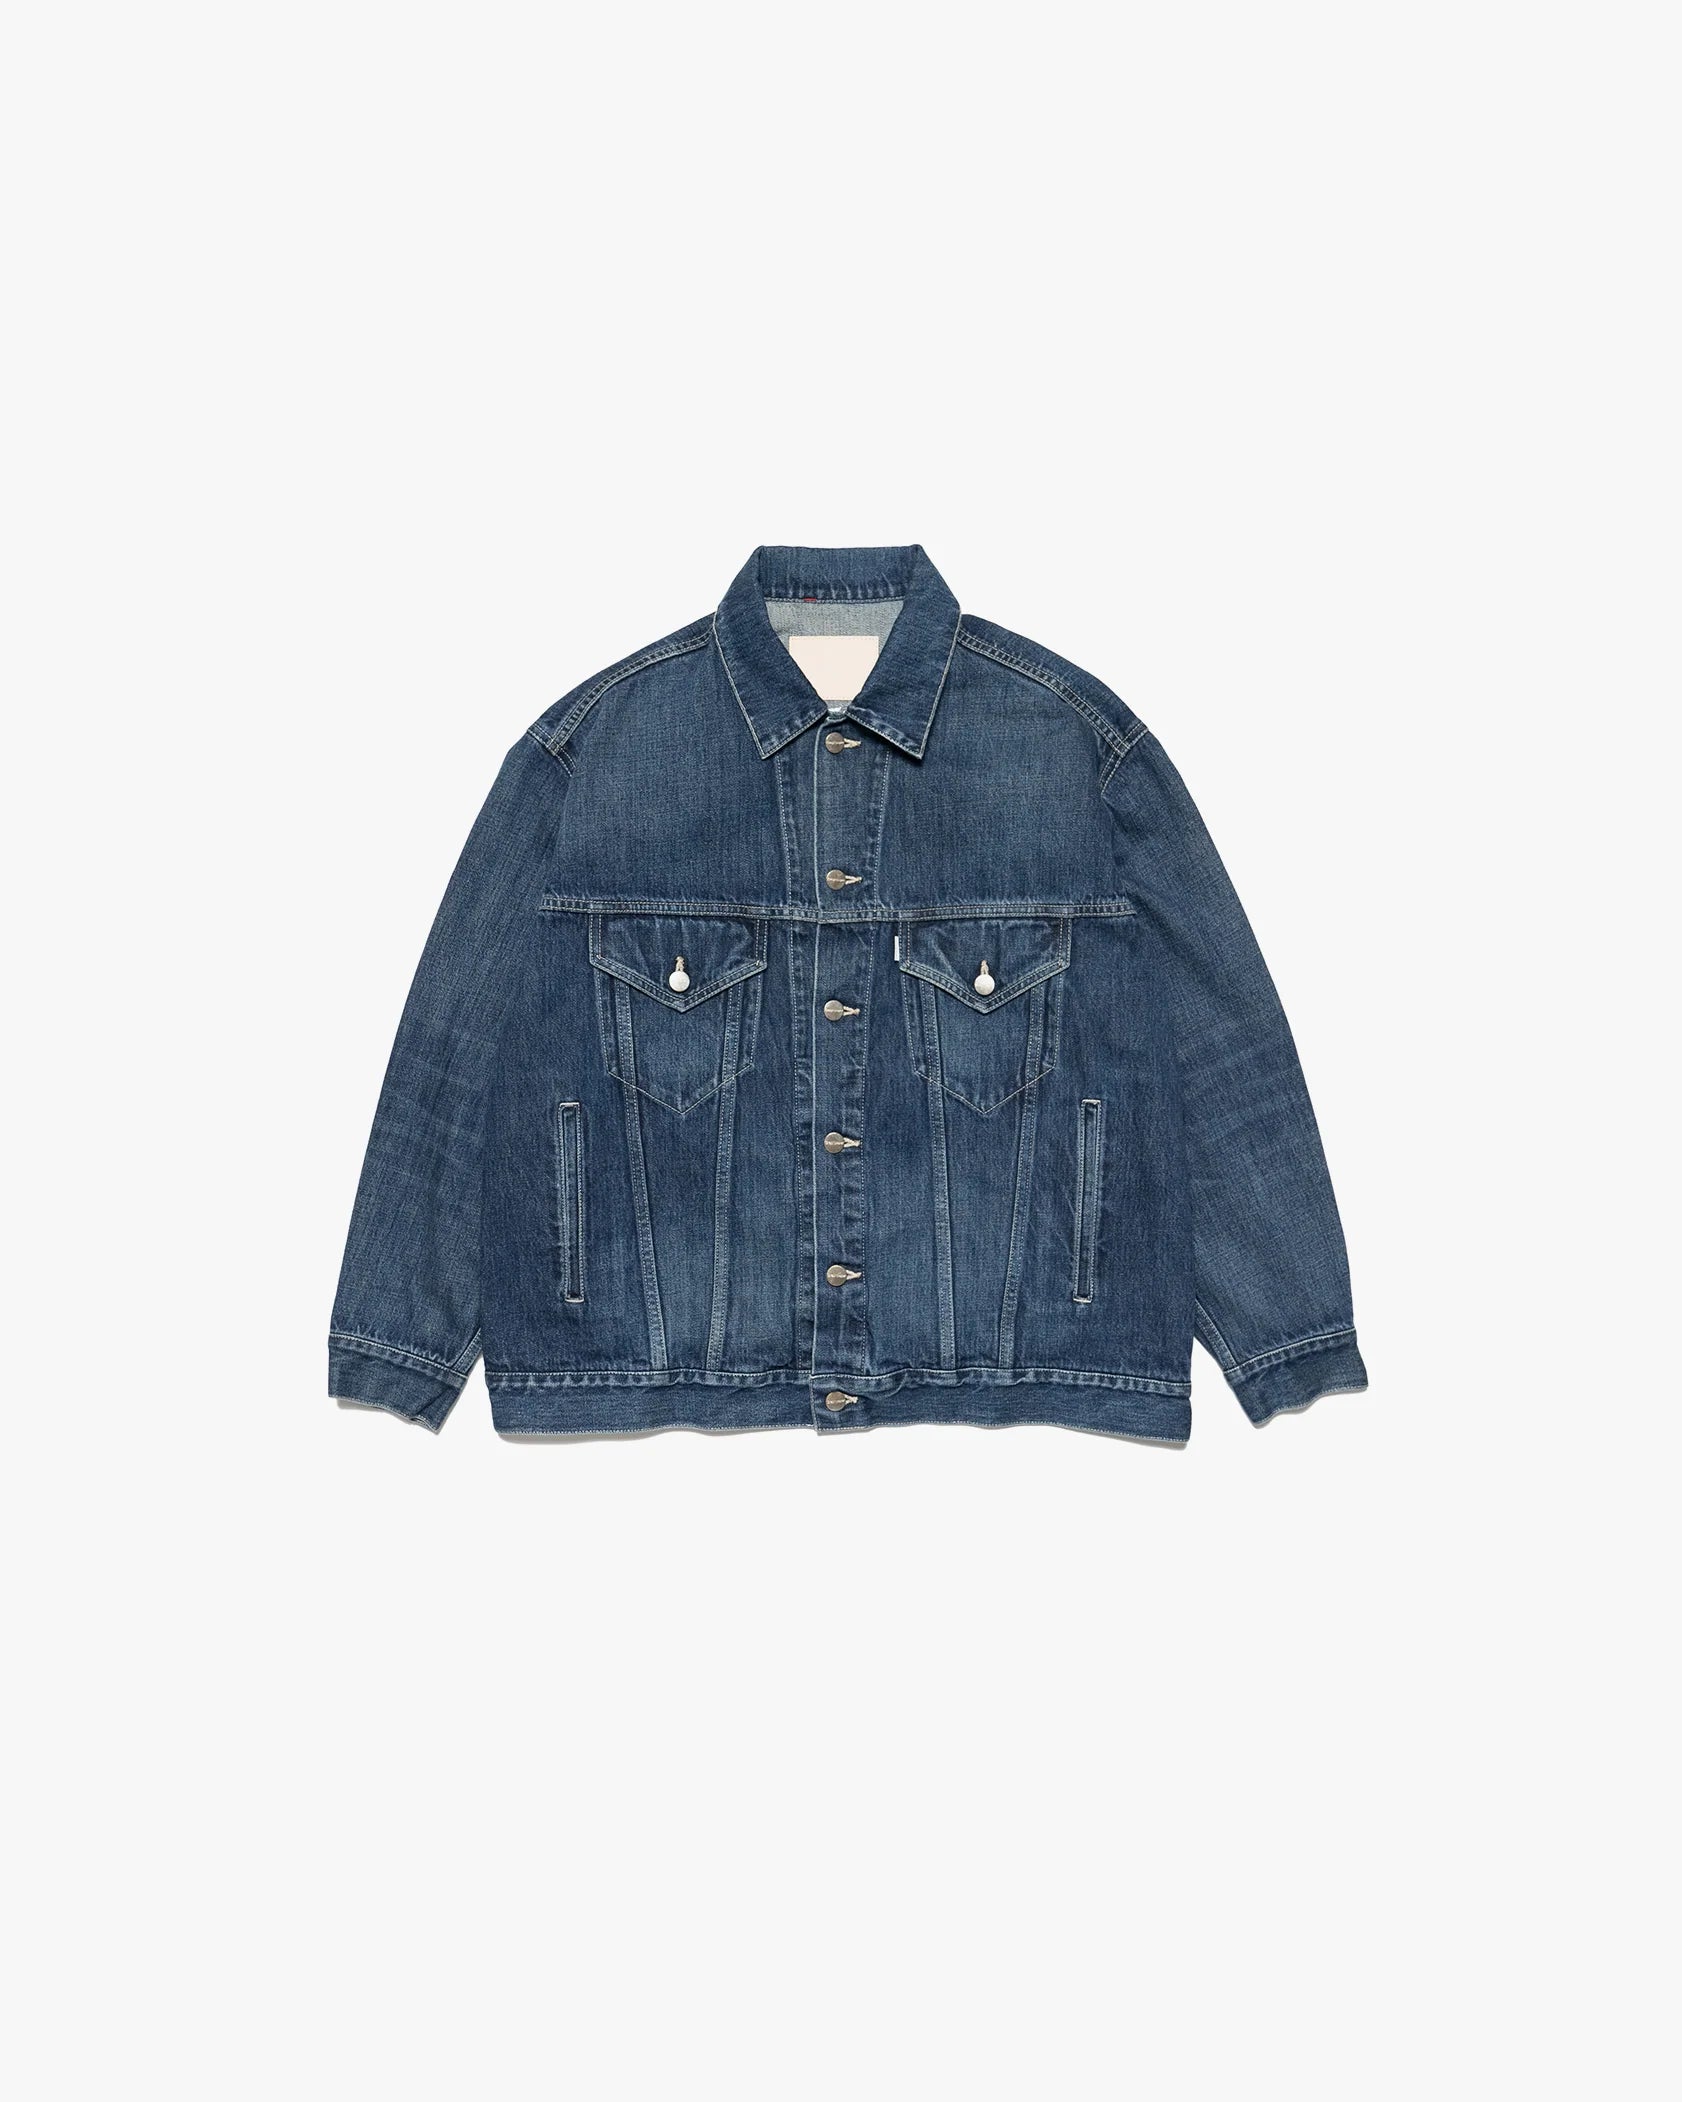 Graphpaper Selvage Denim Trucker Jacket - Dark Fade – unexpected store